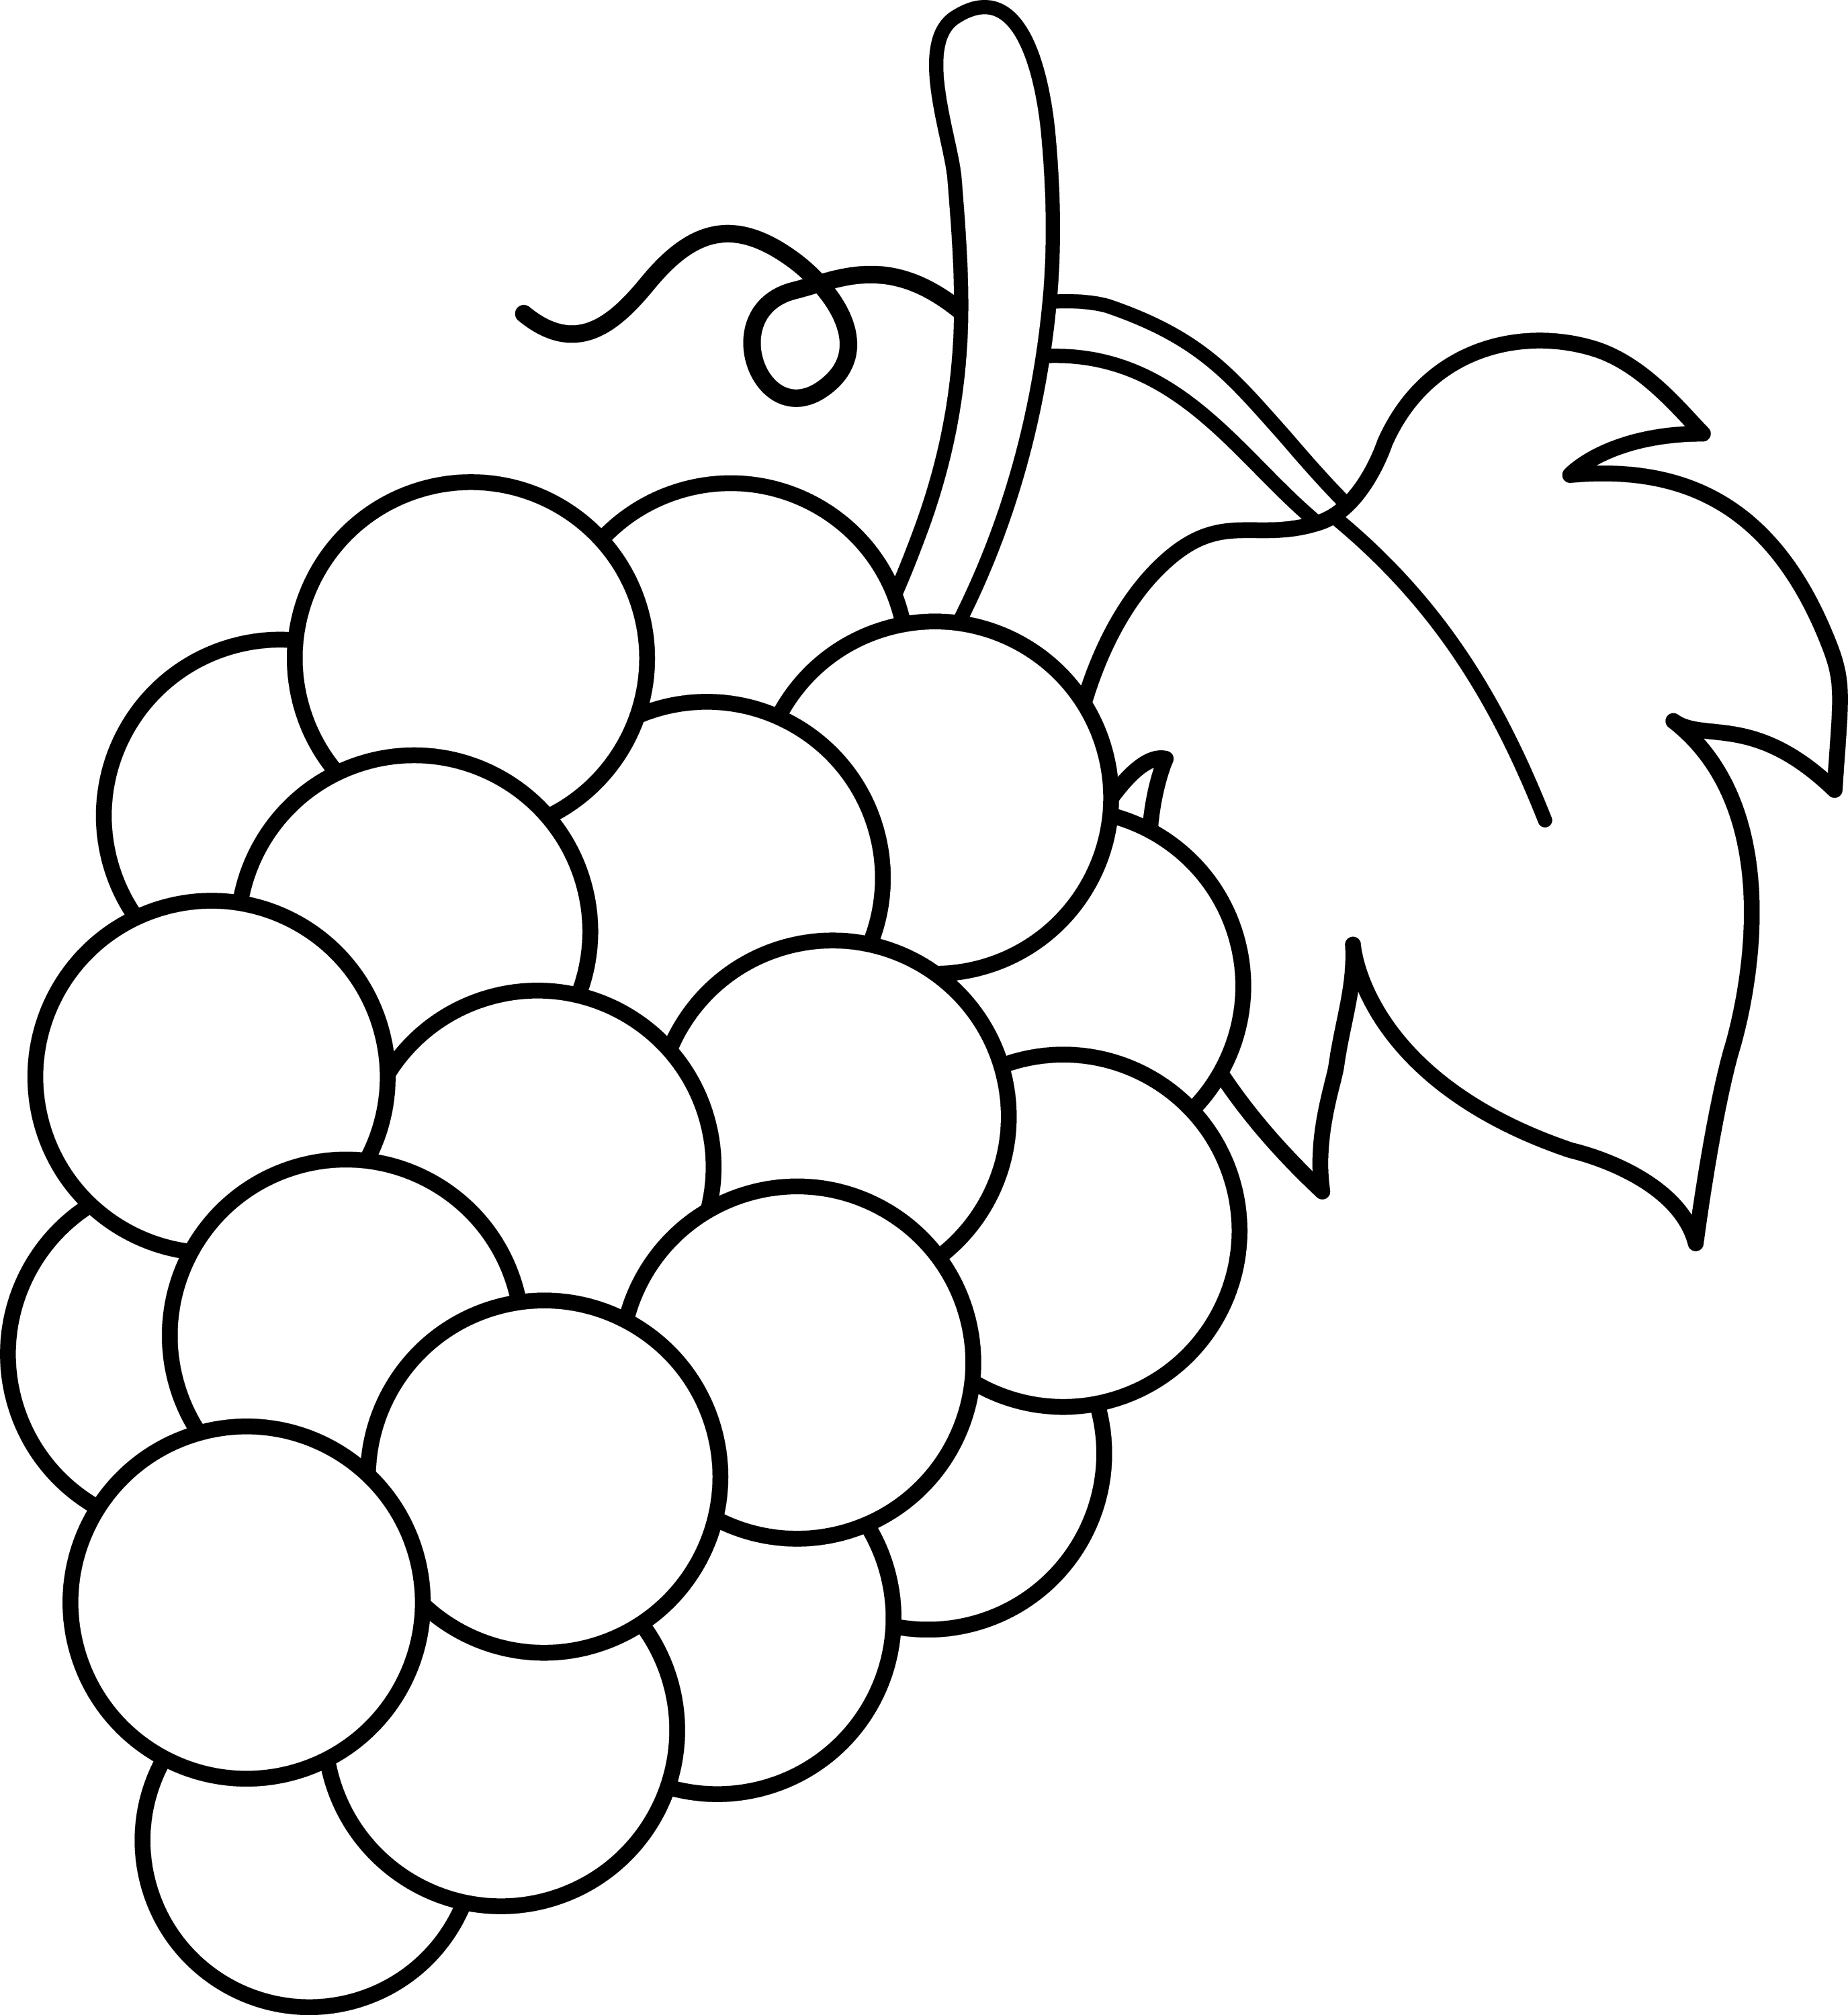 clipart fruits black and white - photo #18